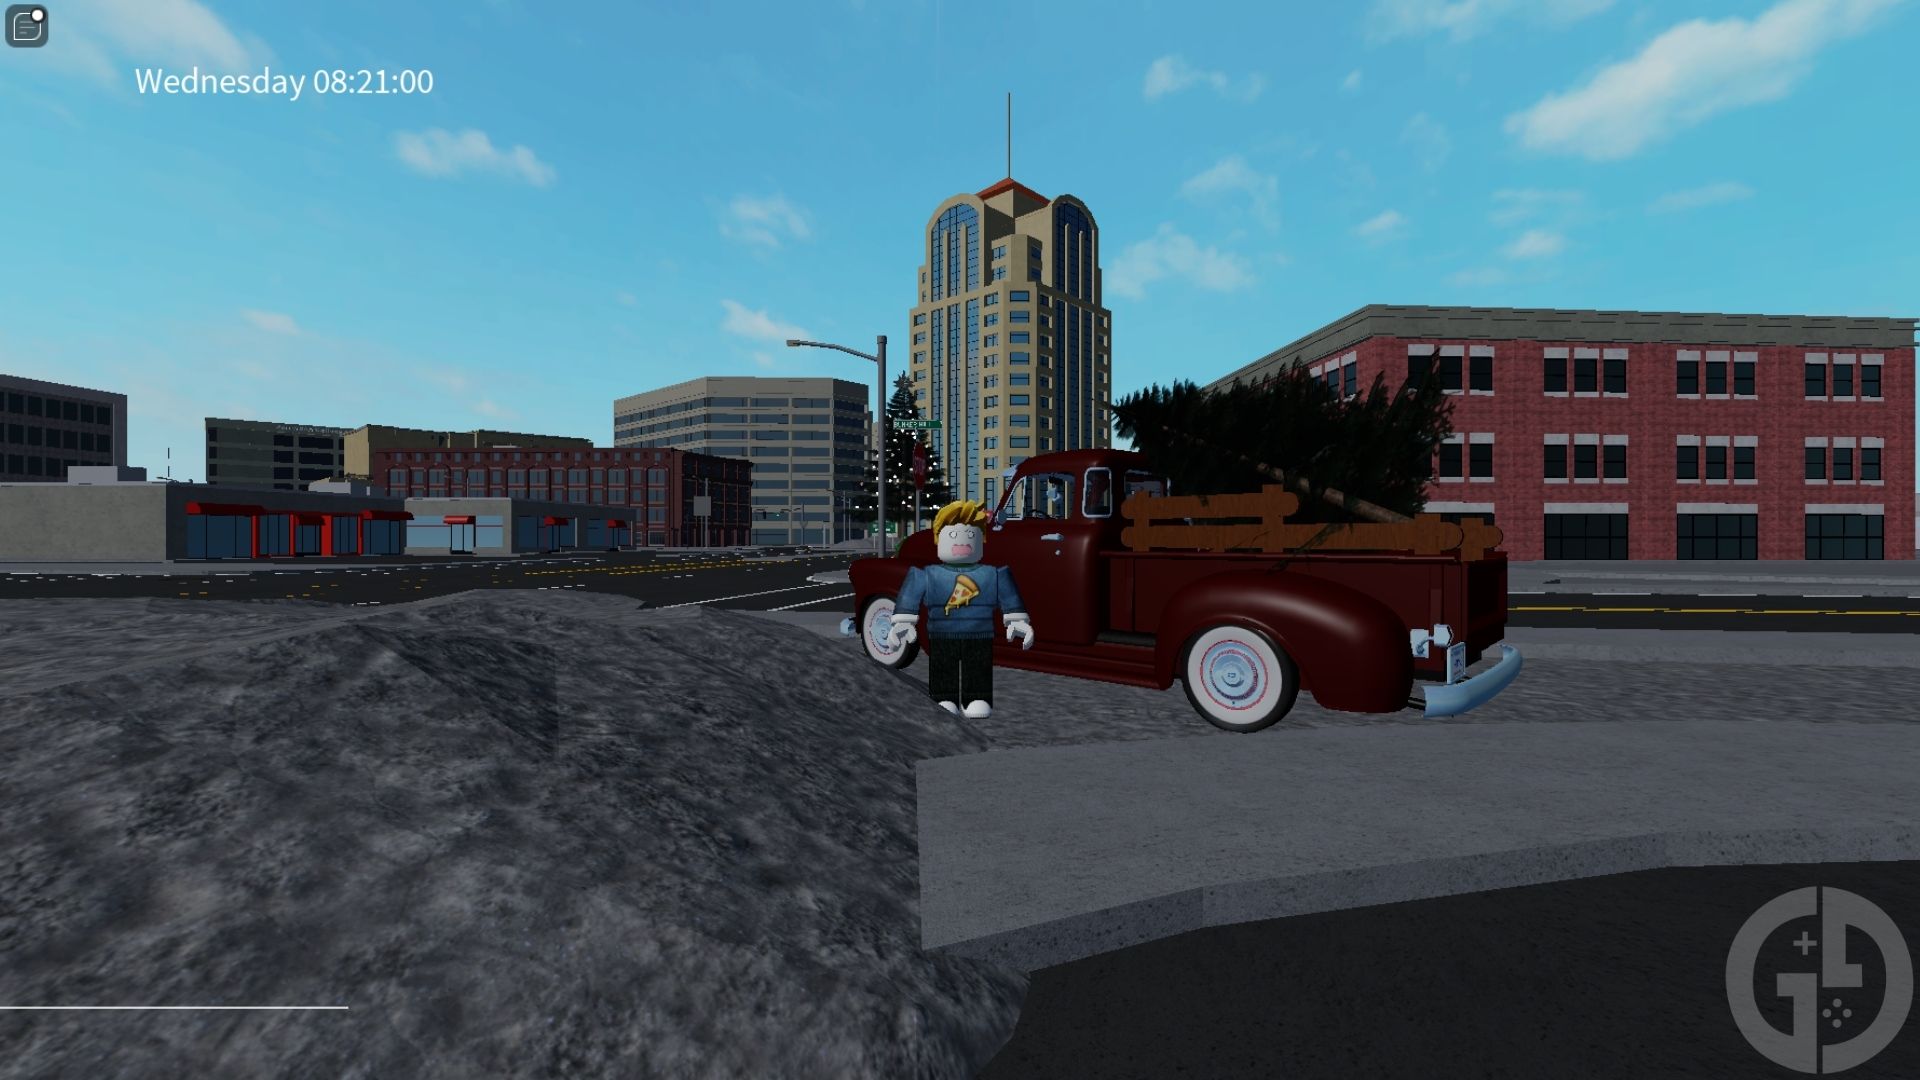 Are there any Roblox Roanoke codes?